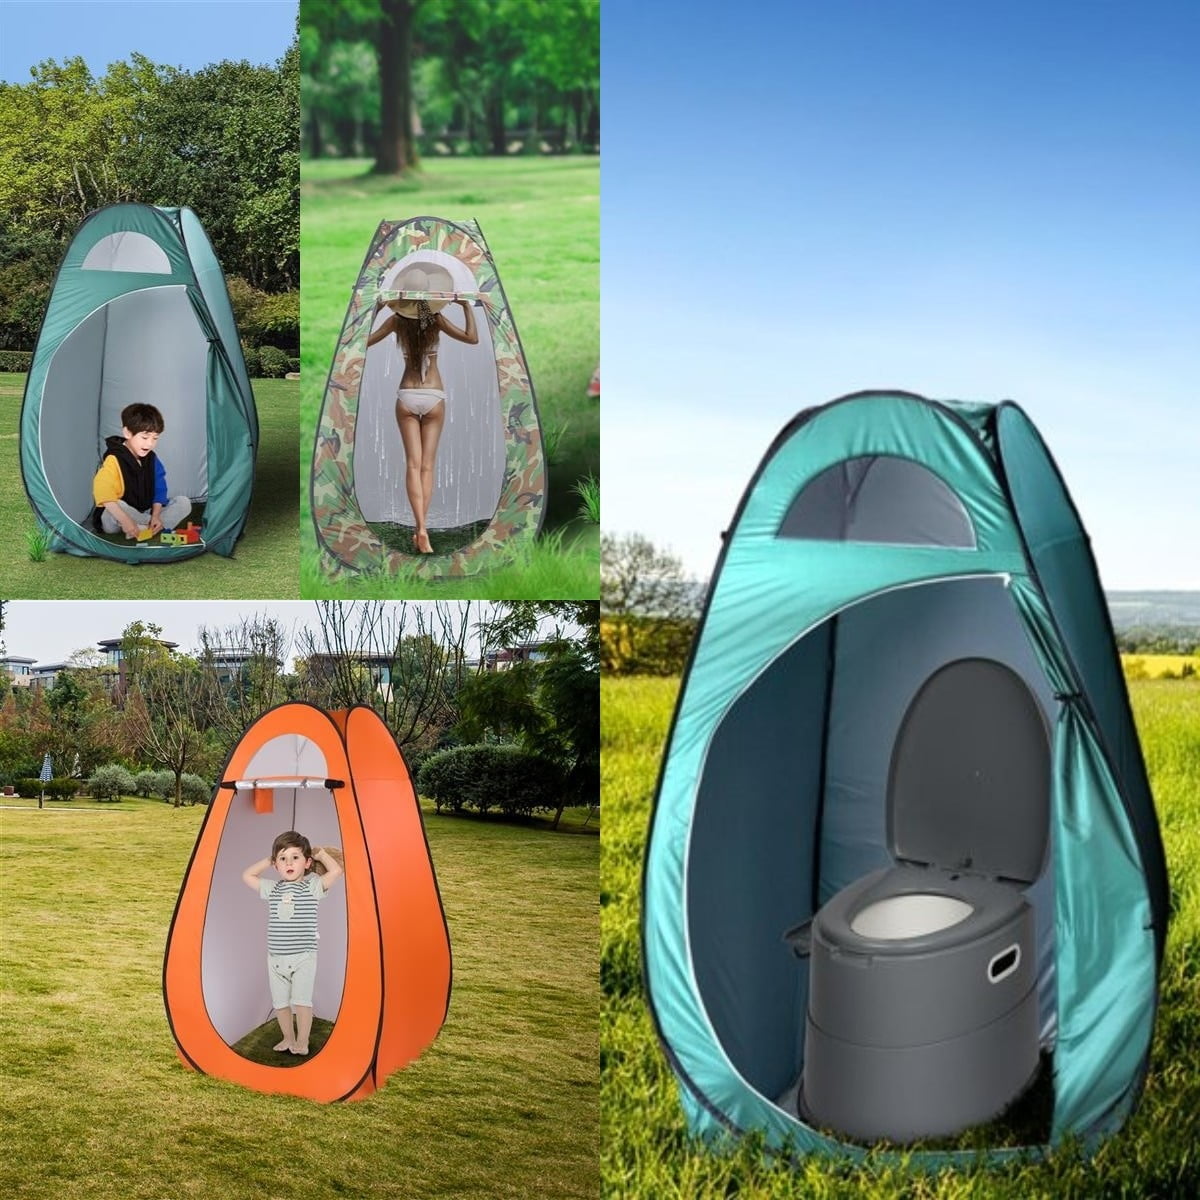 Privacy Tent Pop Up Shower Changing Toilet Tent Portable Camping Privacy Shelter 